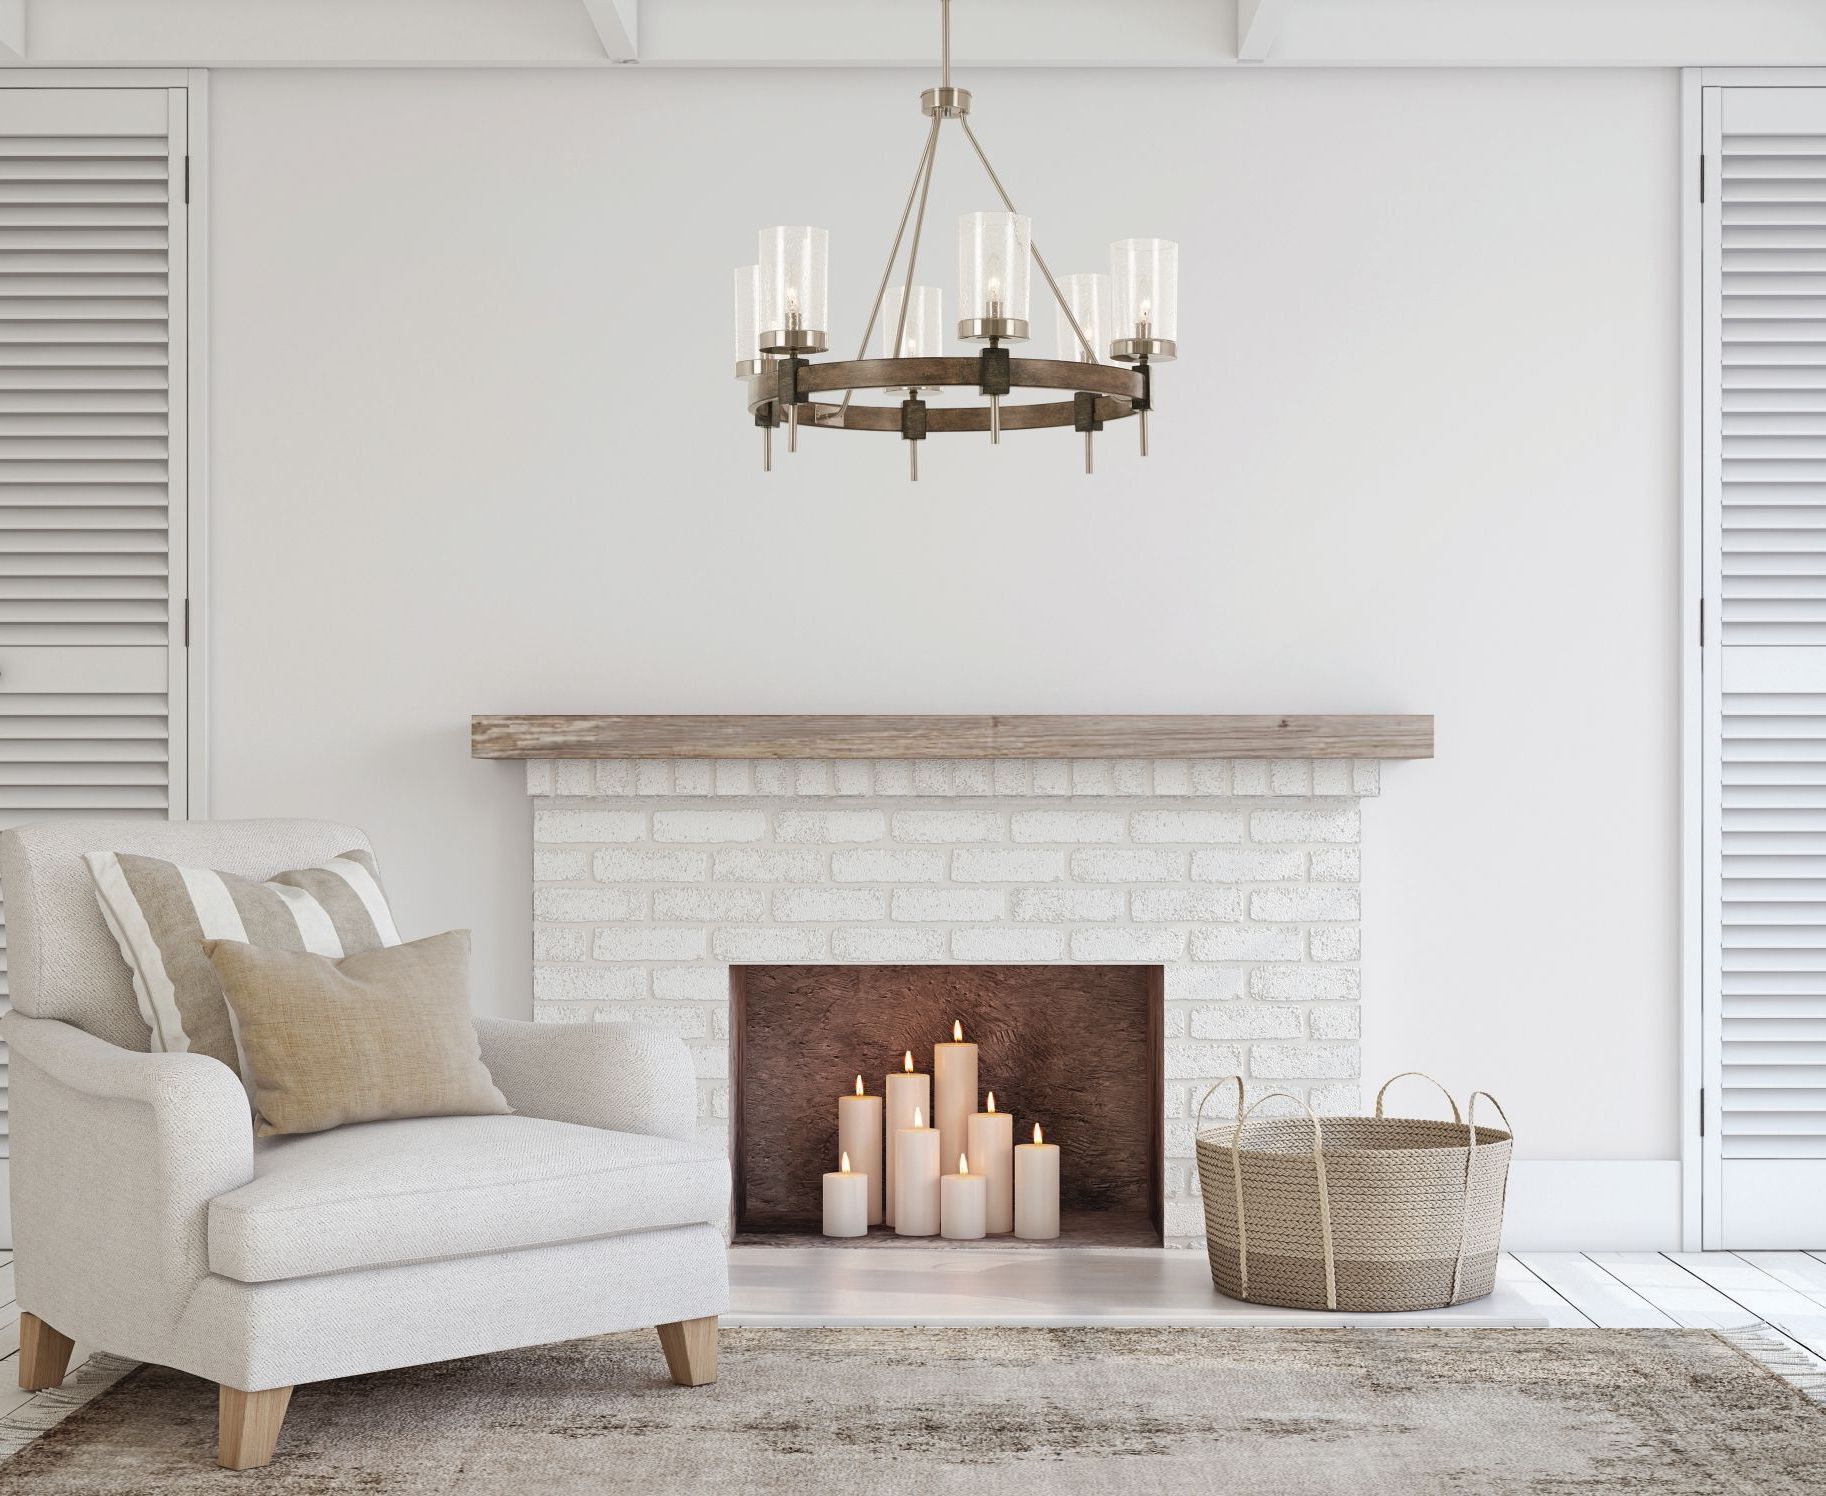 Widely Used Stone Grey With Brushed Nickel Six Light Chandeliers Regarding Minka Lavery Bridlewood 6 Light Chandelier In Stone Grey (View 12 of 20)